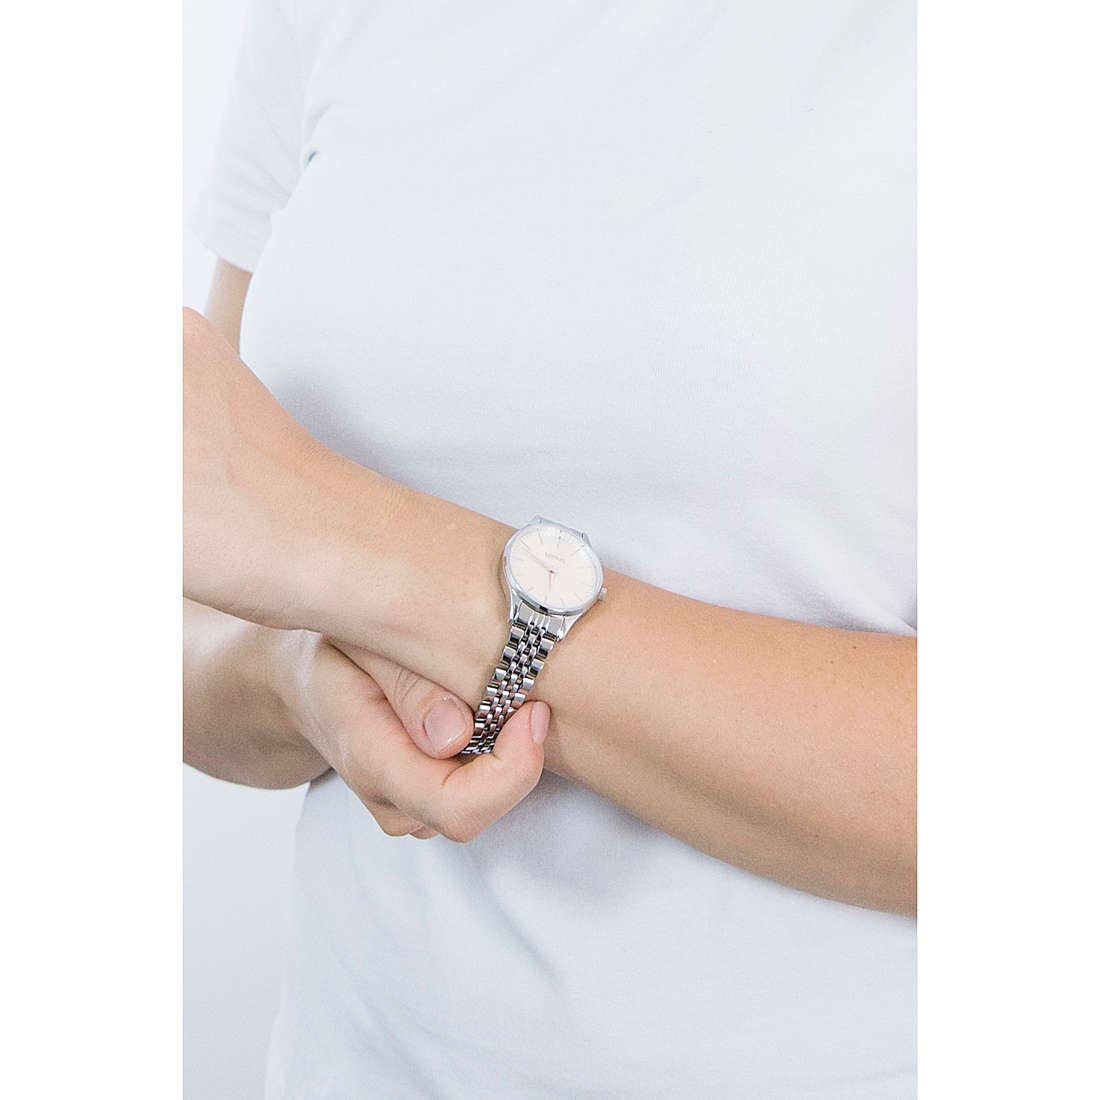 Lorus only time Classic woman RG211PX9 wearing